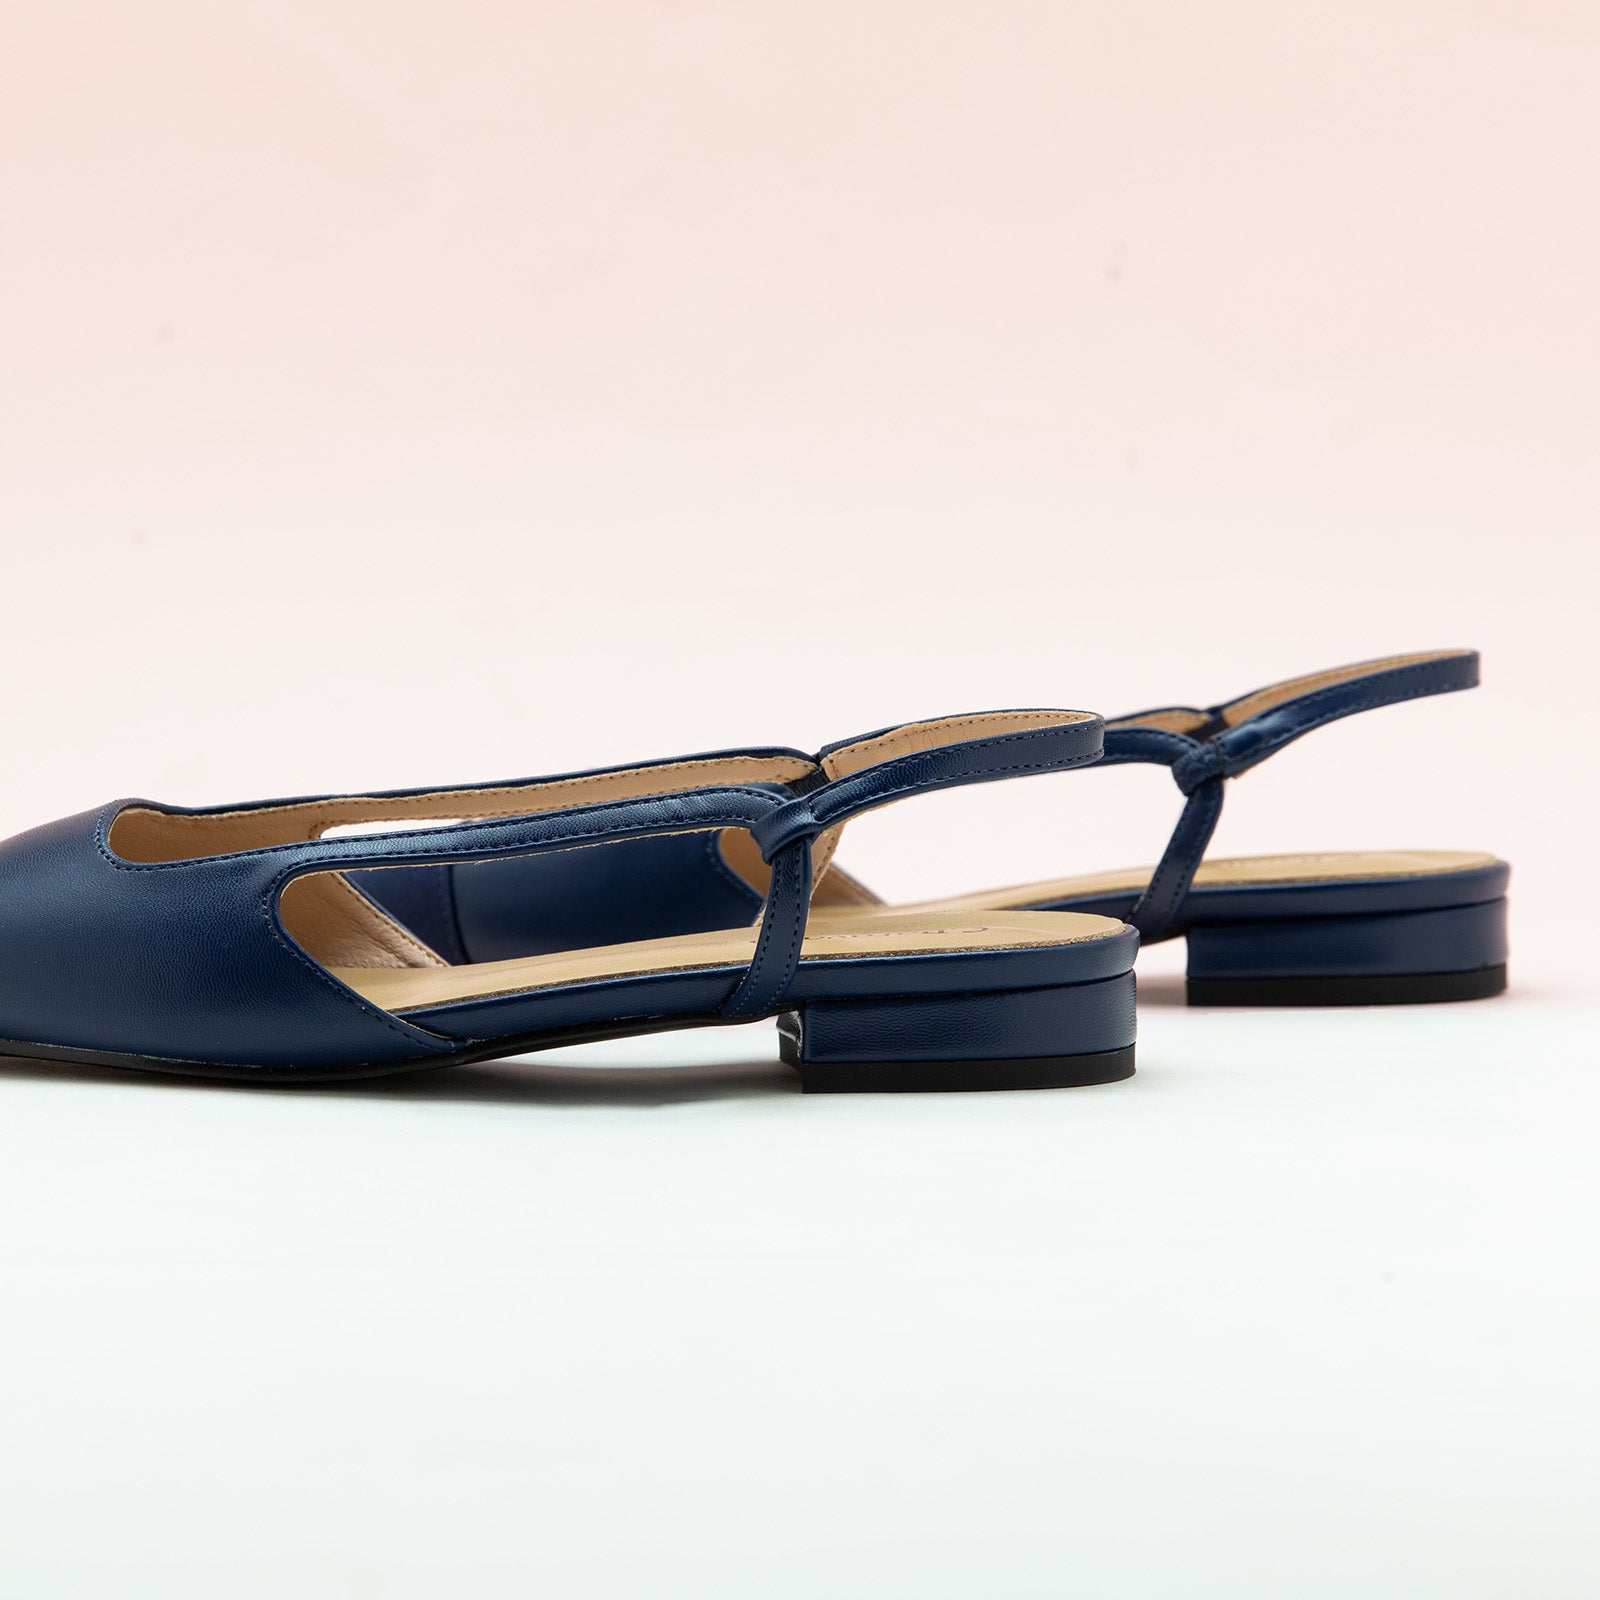 Navy Elegant Pointe Toe Slingback Flats, a modern and edgy choice for city styling with a touch of sophistication